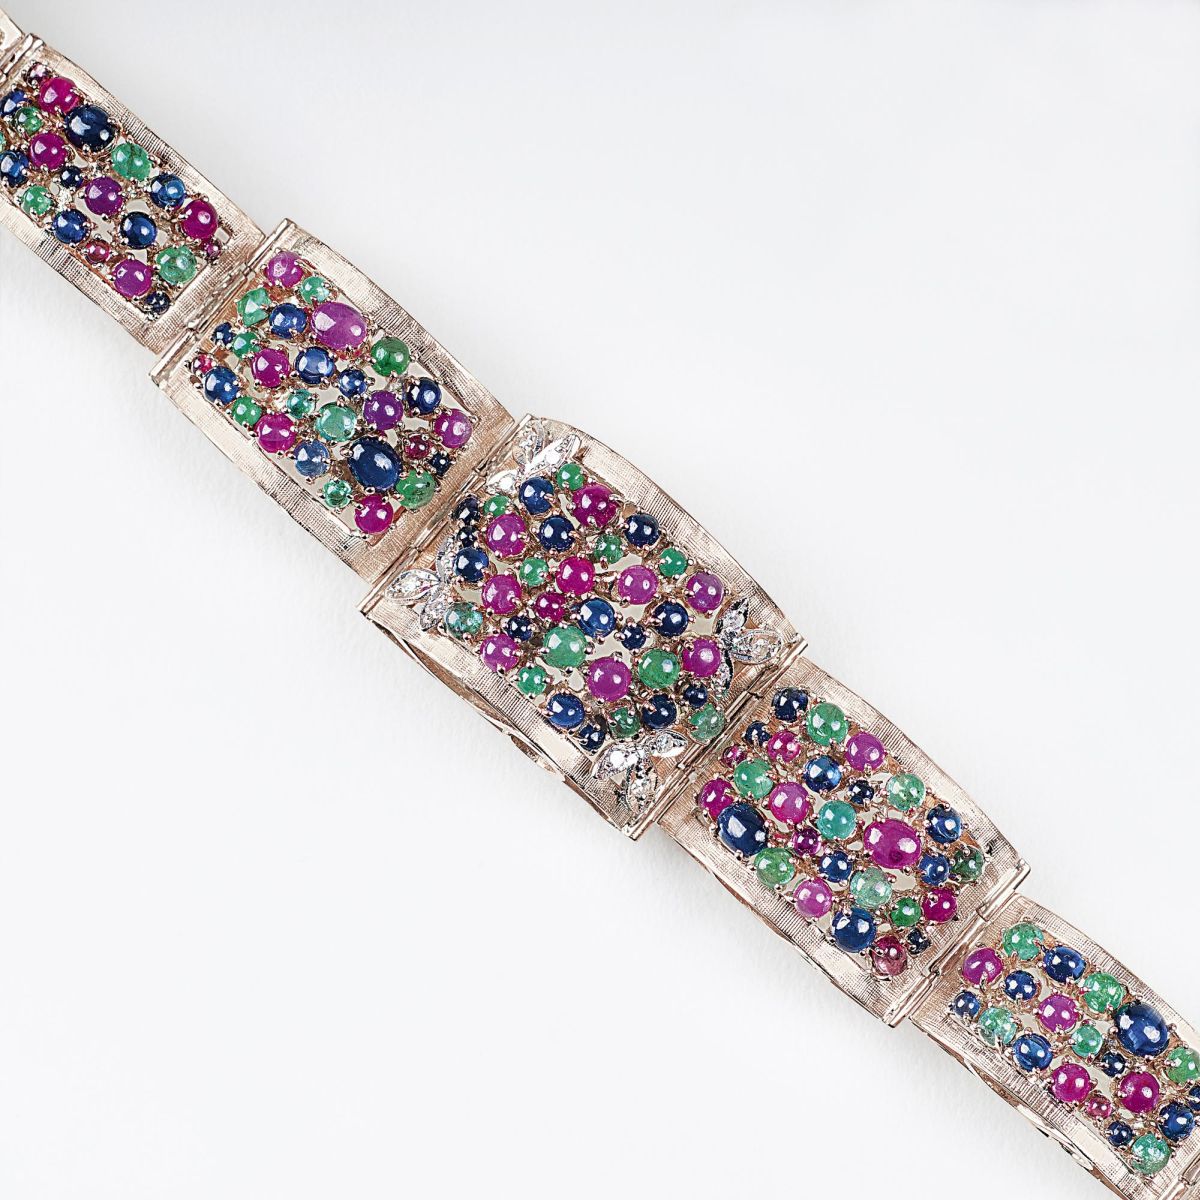 A Gold Bracelet with Rubies, Emeralds and Sapphires